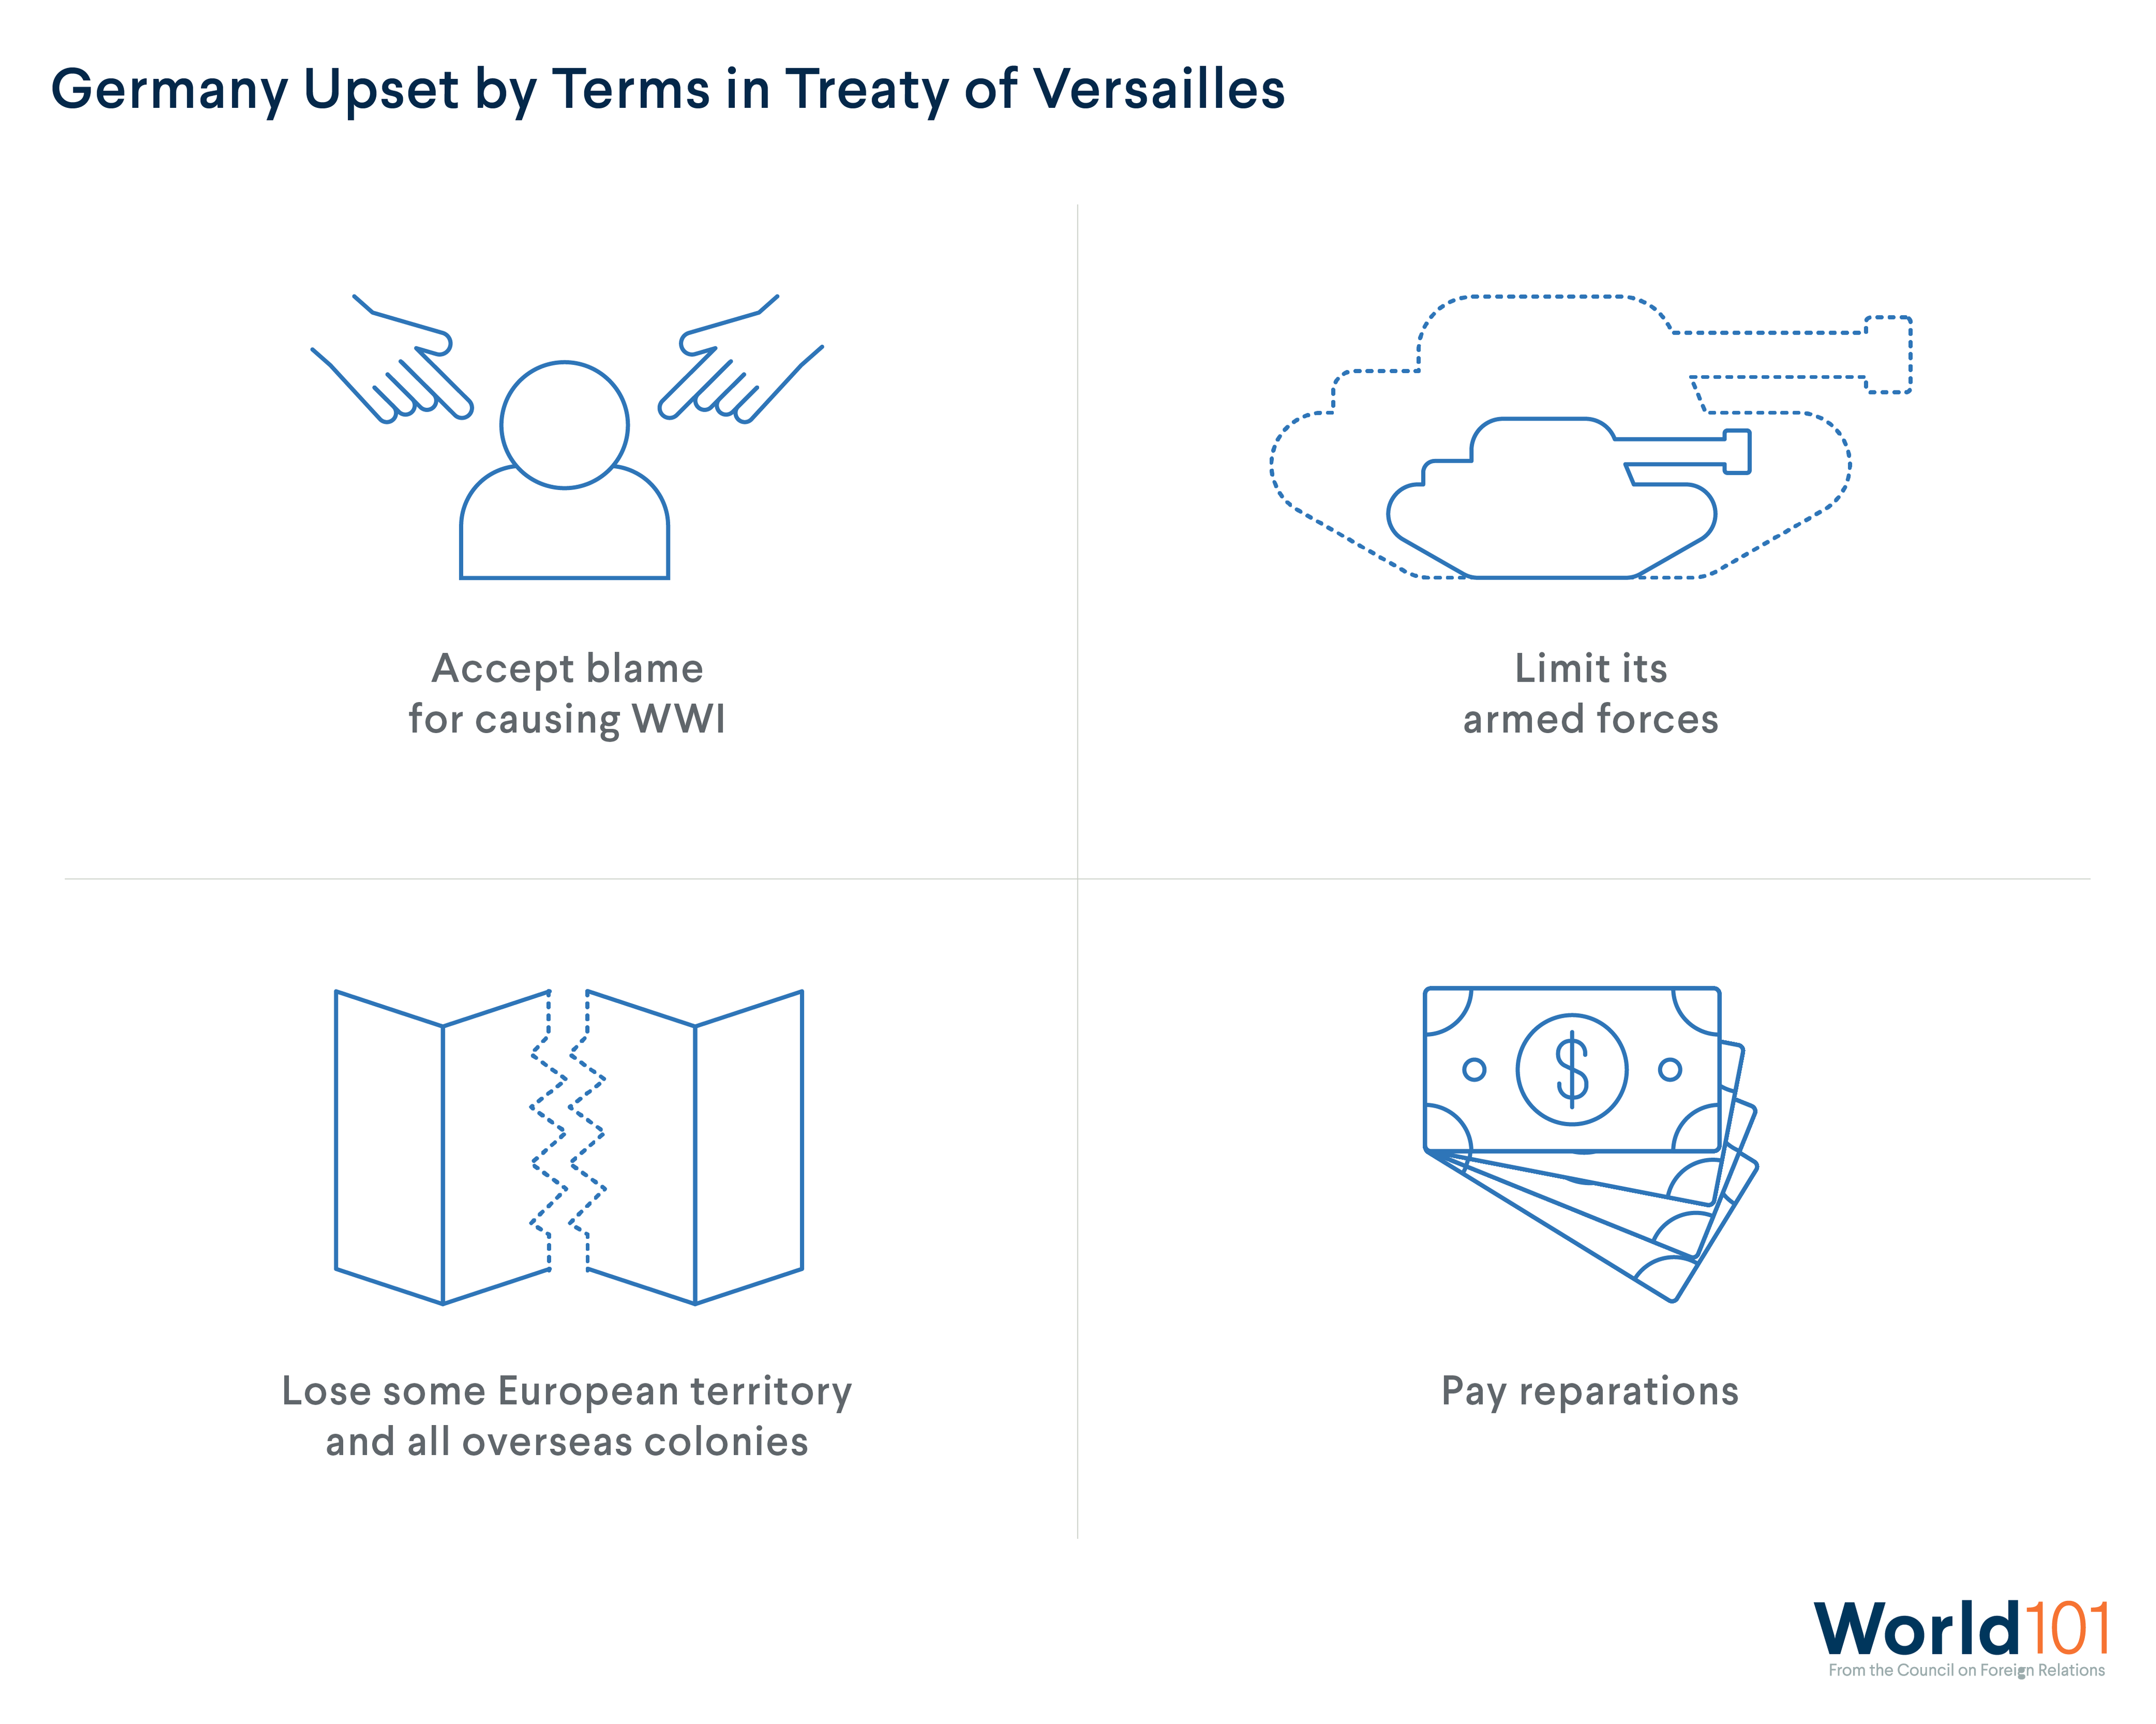 Germany Upset by Terms in Treaty of Versailles: Accept blame for WW1, Limit its armed forces, lose some European Territory and colonies, and Pay reparations. For more info contact us at world101@cfr.org.